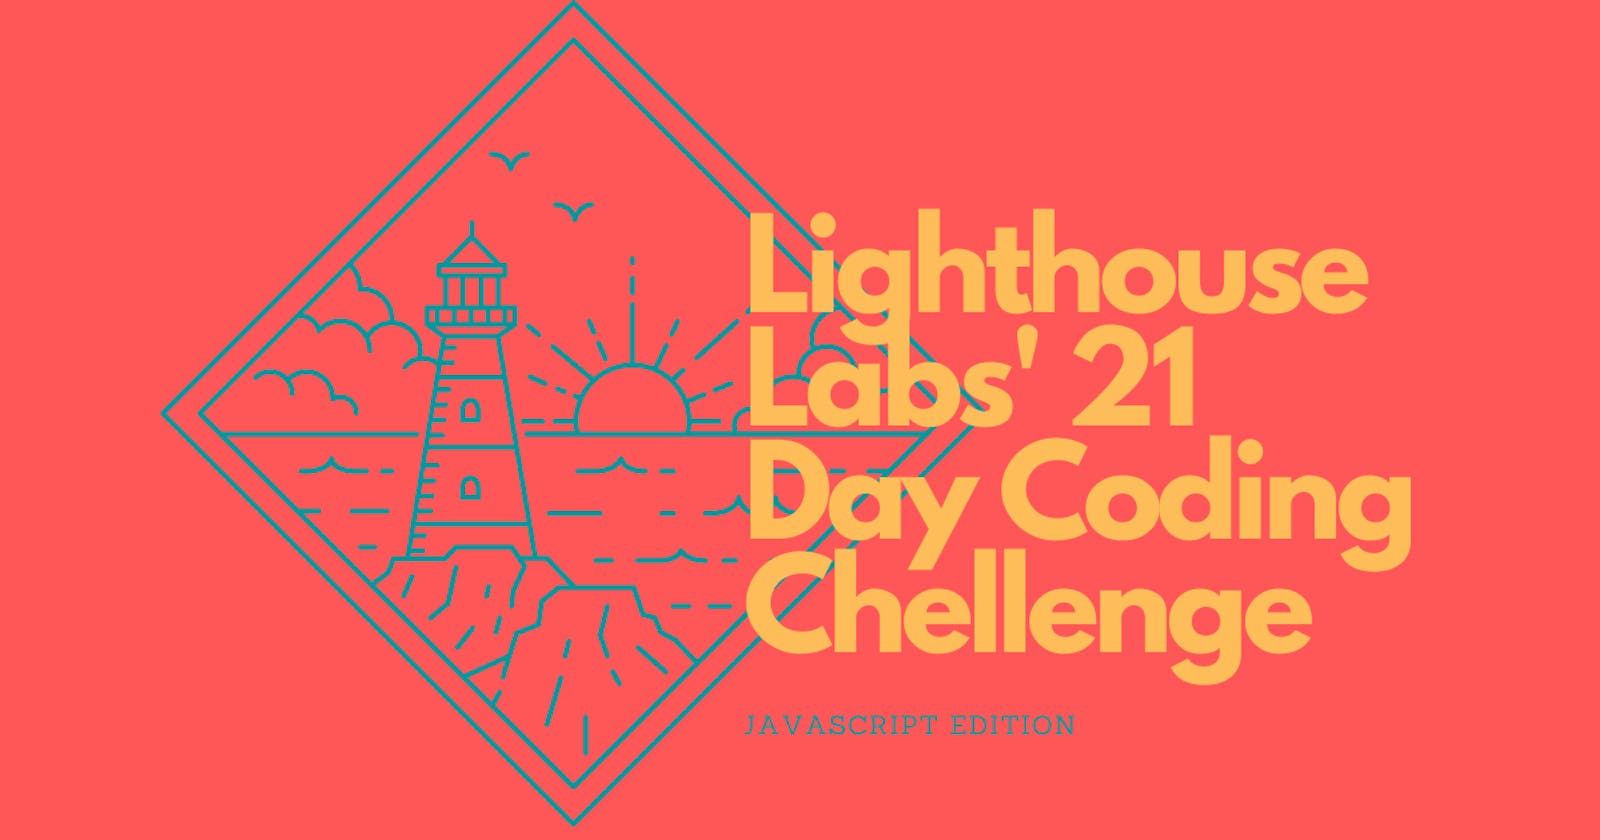 Lighthouse Labs' 21 Day Coding Challenge